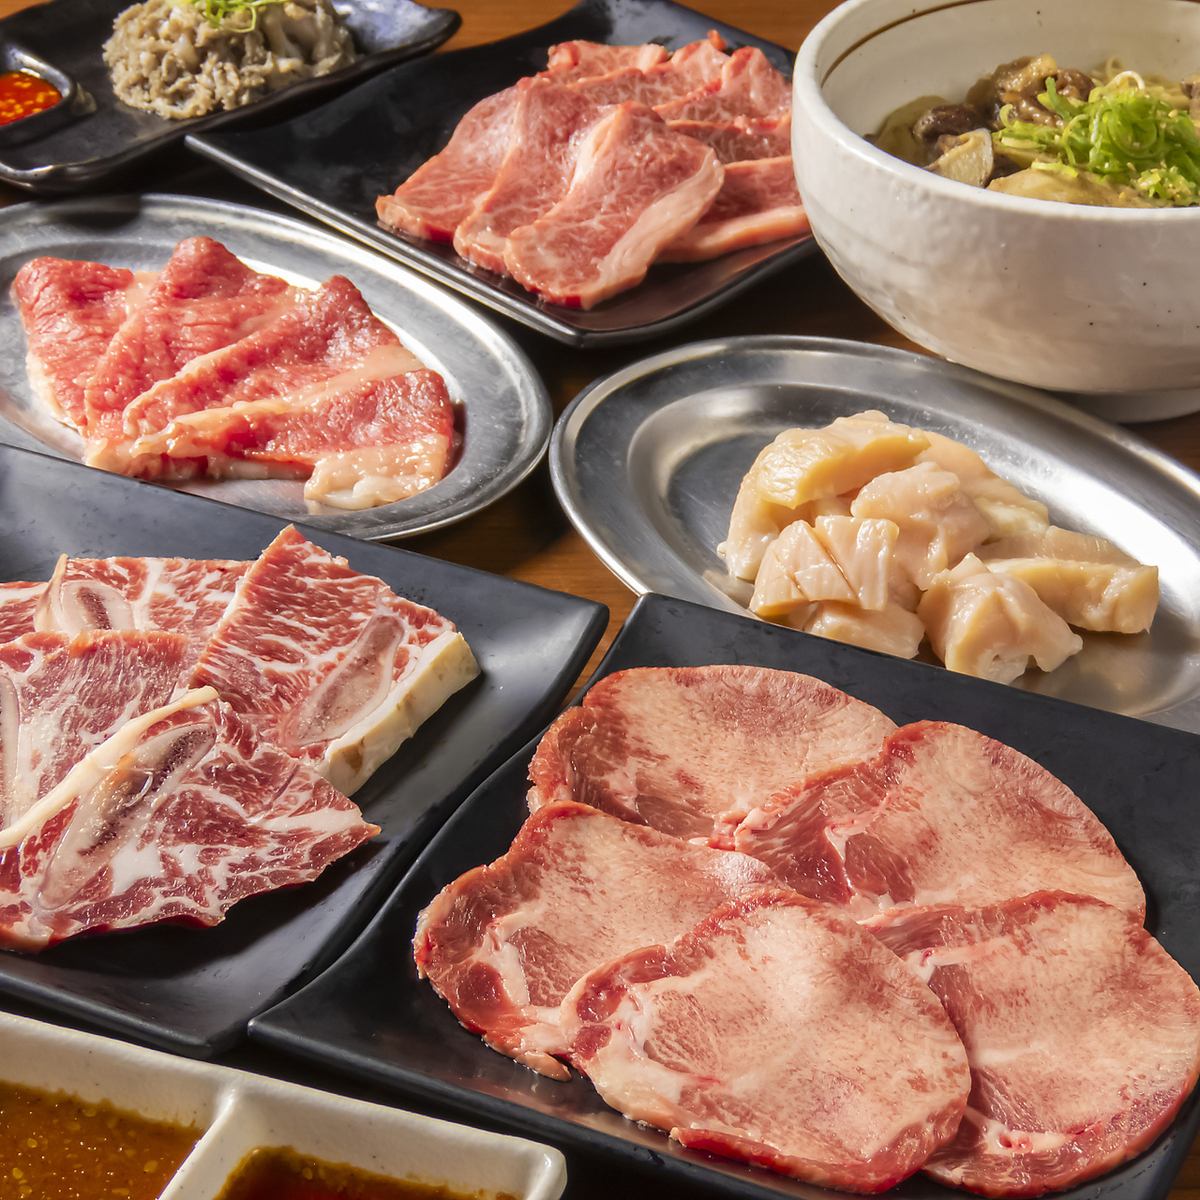 This is not just an all-you-can-eat restaurant! Enjoy high-quality meat directly from a butcher shop!